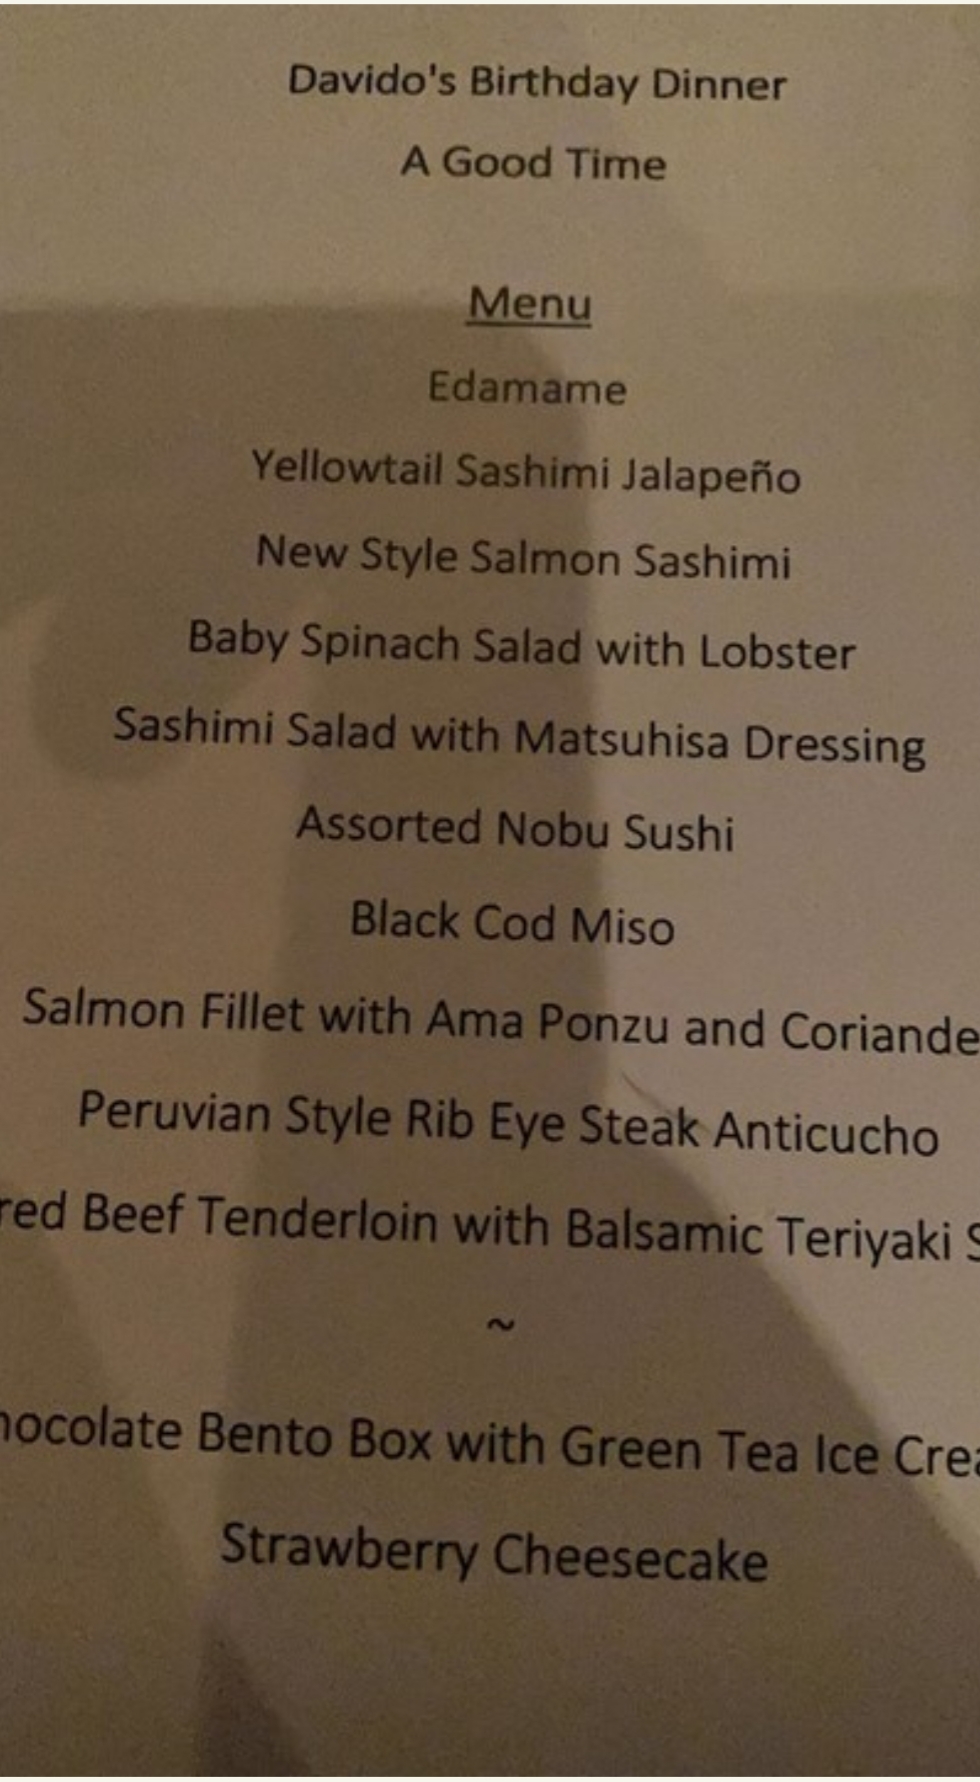 Davido turns 27: shares mouth-watering Menu for Birthday Dinner